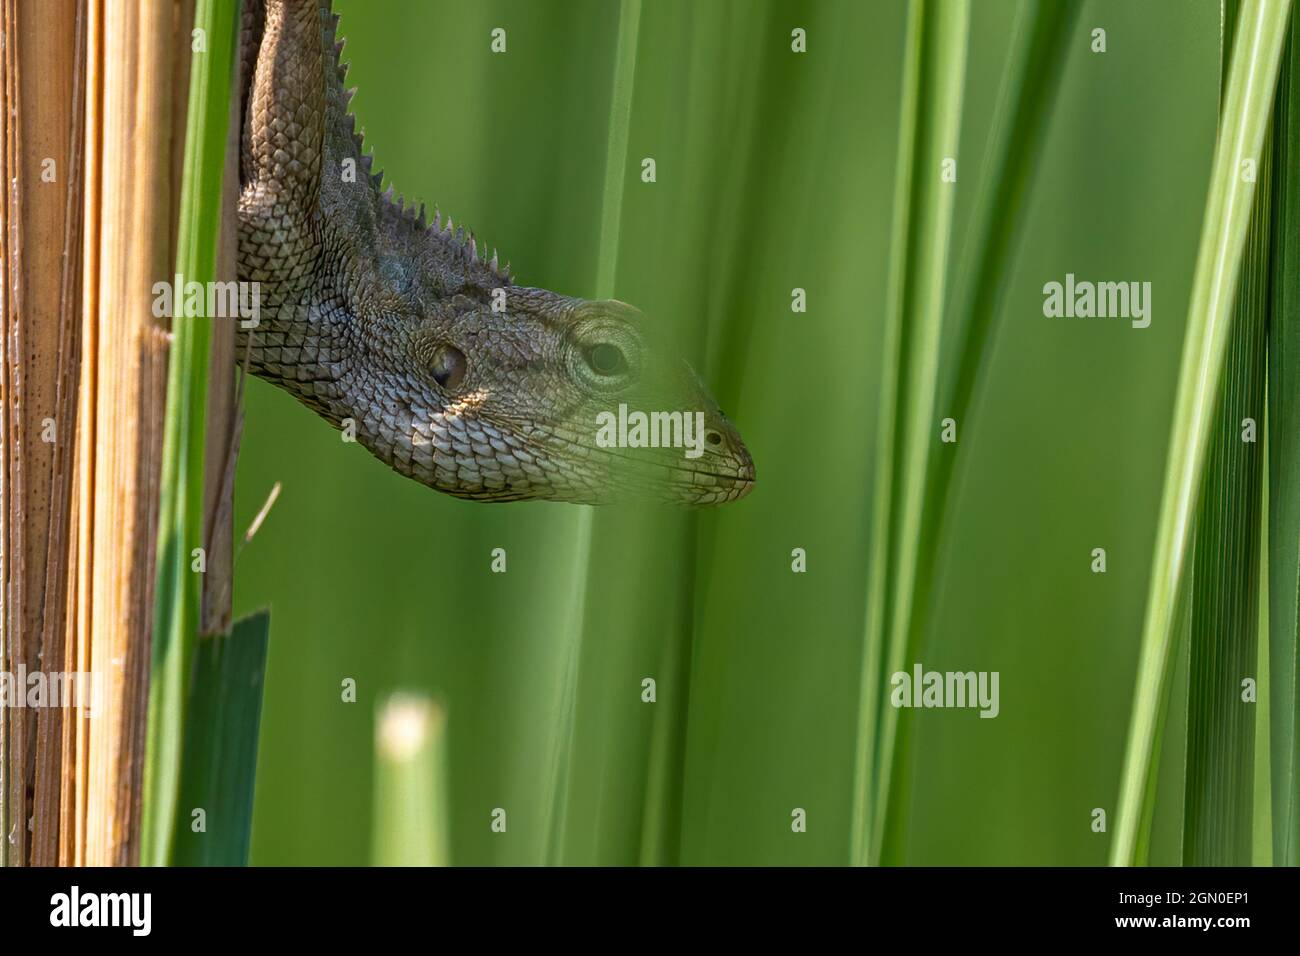 Chameleon trying to hide in grass Stock Photo